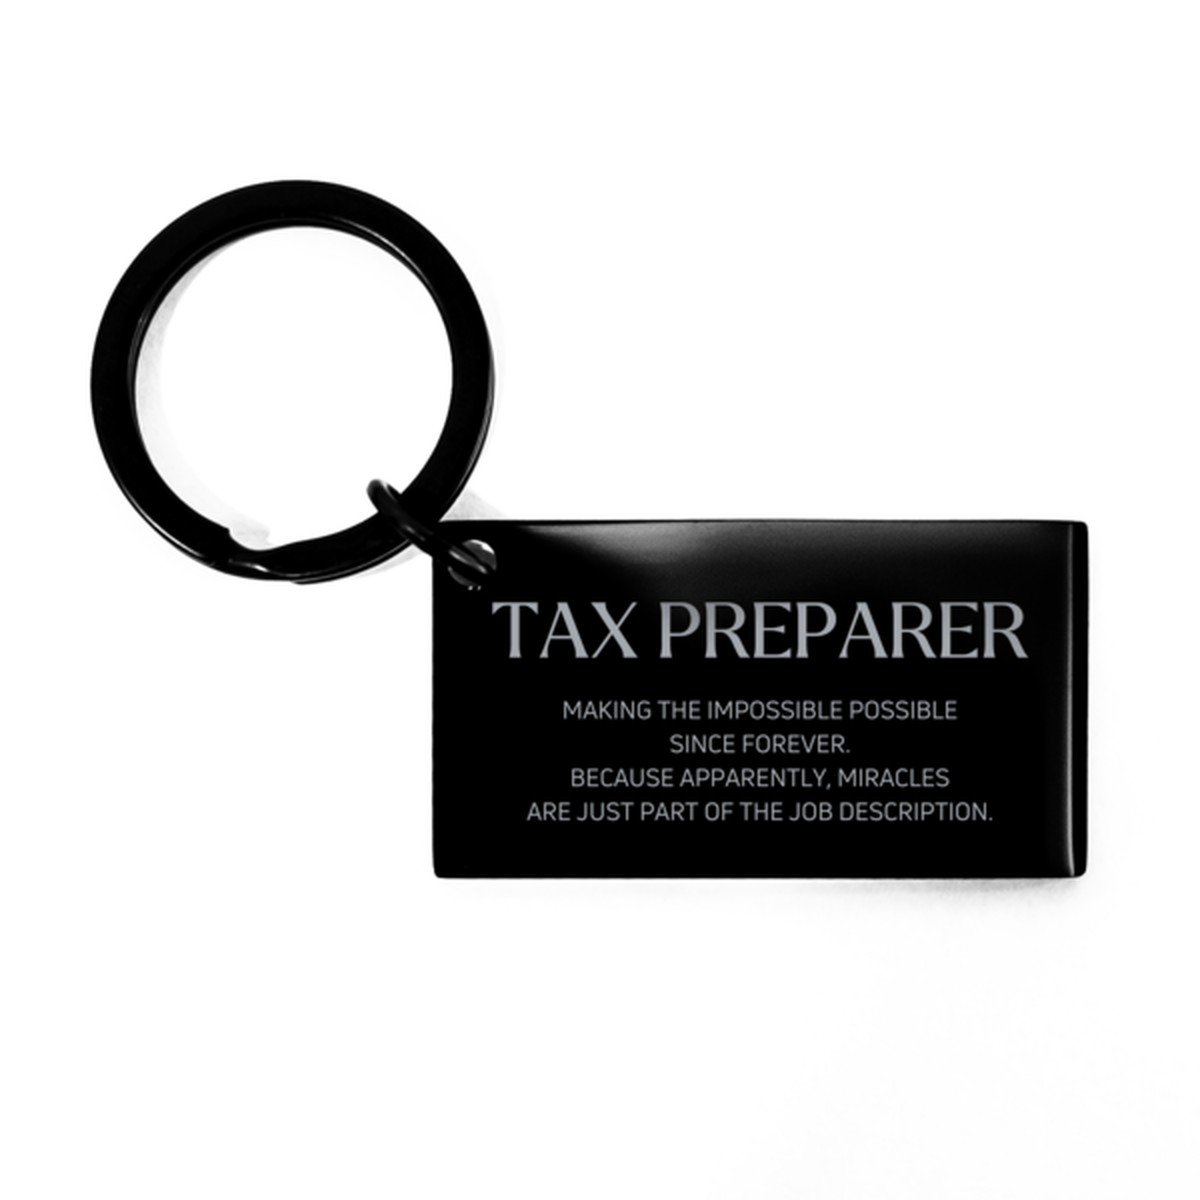 Funny Tax Preparer Gifts, Miracles are just part of the job description, Inspirational Birthday Keychain For Tax Preparer, Men, Women, Coworkers, Friends, Boss